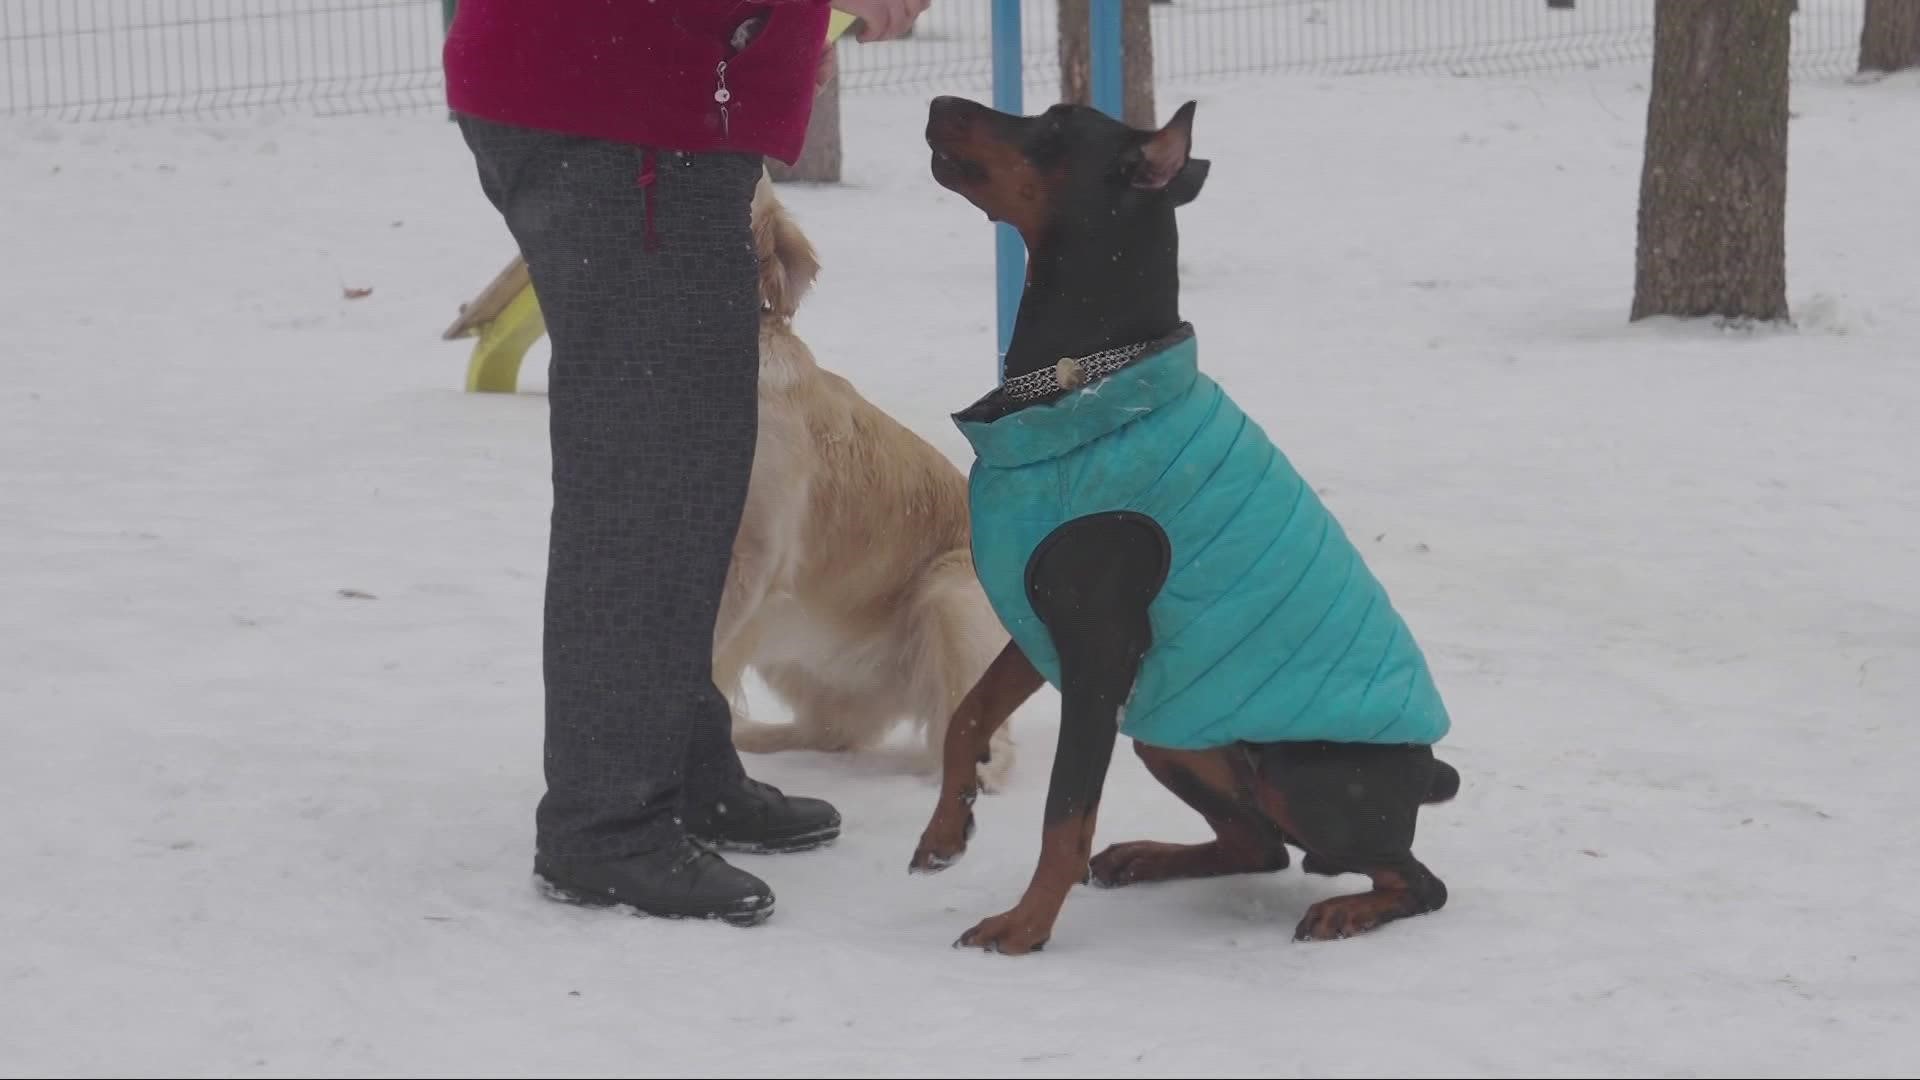 We get some expert advice on winter safety tips for your dogs.